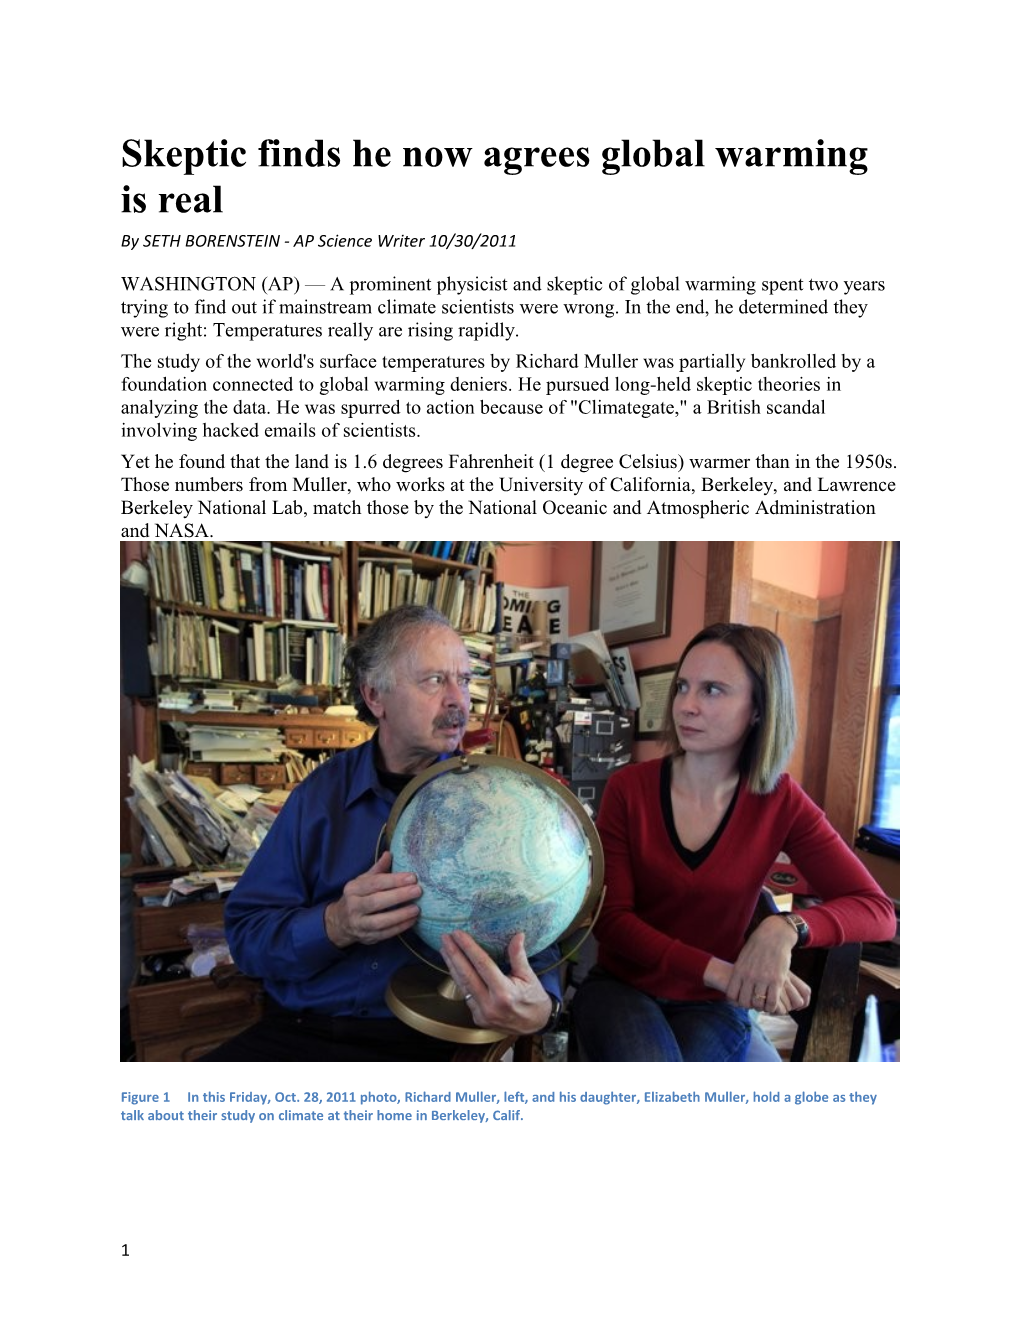 Skeptic Finds He Now Agrees Global Warming Is Real